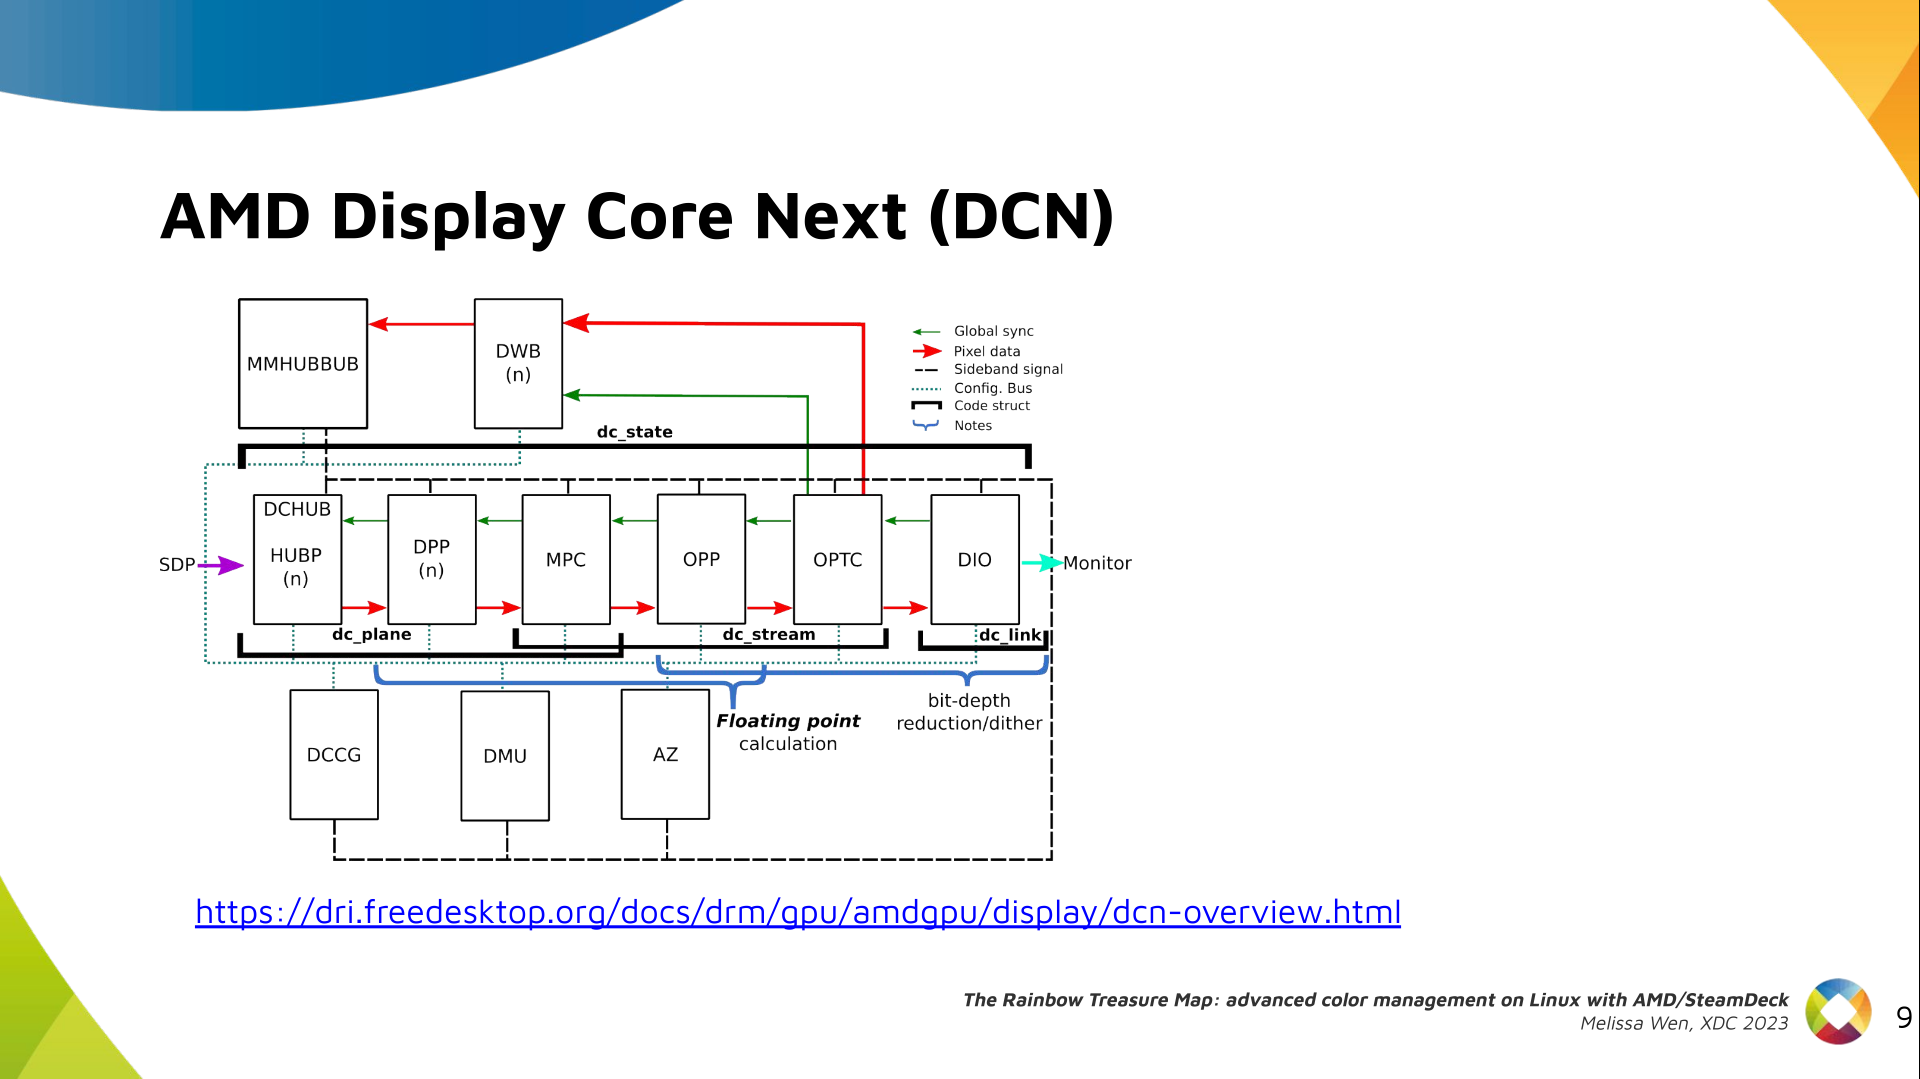 Slide 9: Diagram of the AMD Display Core Next architecture with main elements and data flow